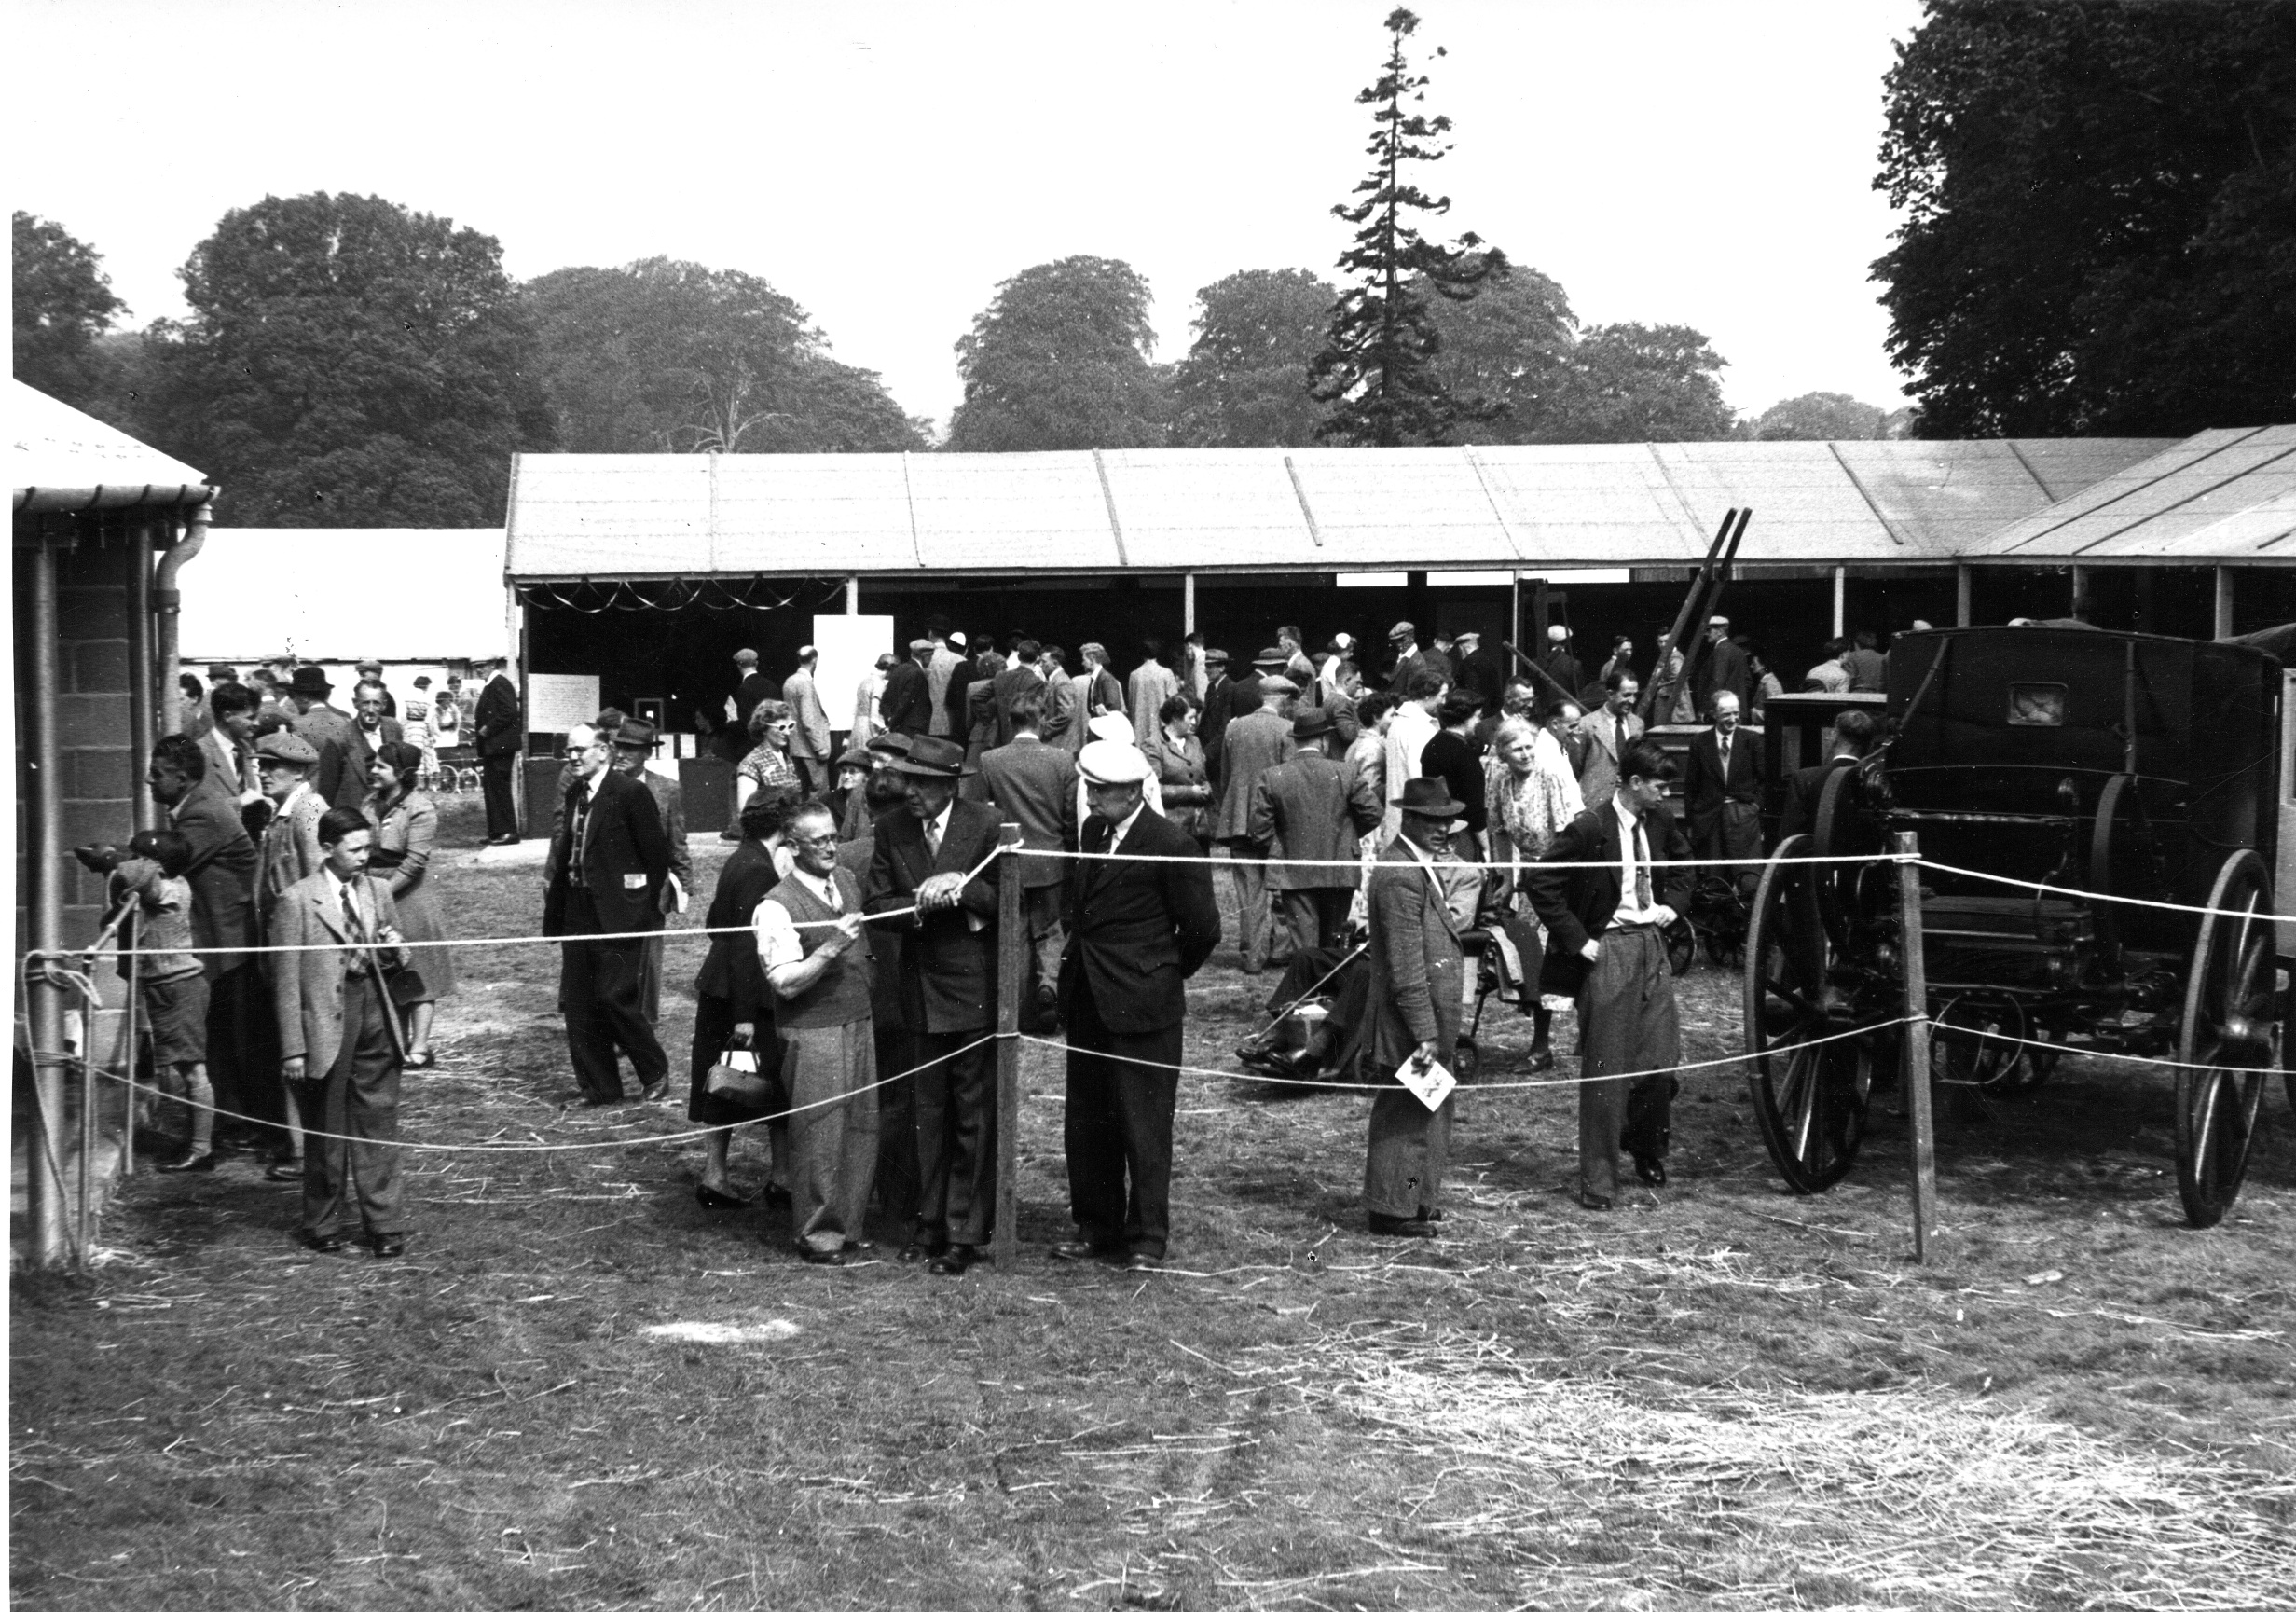 The Museum of English Life Stand at the Royal Agricultural Show, Nottingham, 1955, which was a reconstruction of the first Royal Agricultural Show held in Oxford in 1839. This black and white image shows people looking at old machinery and equipment on the Museum's a trade stand